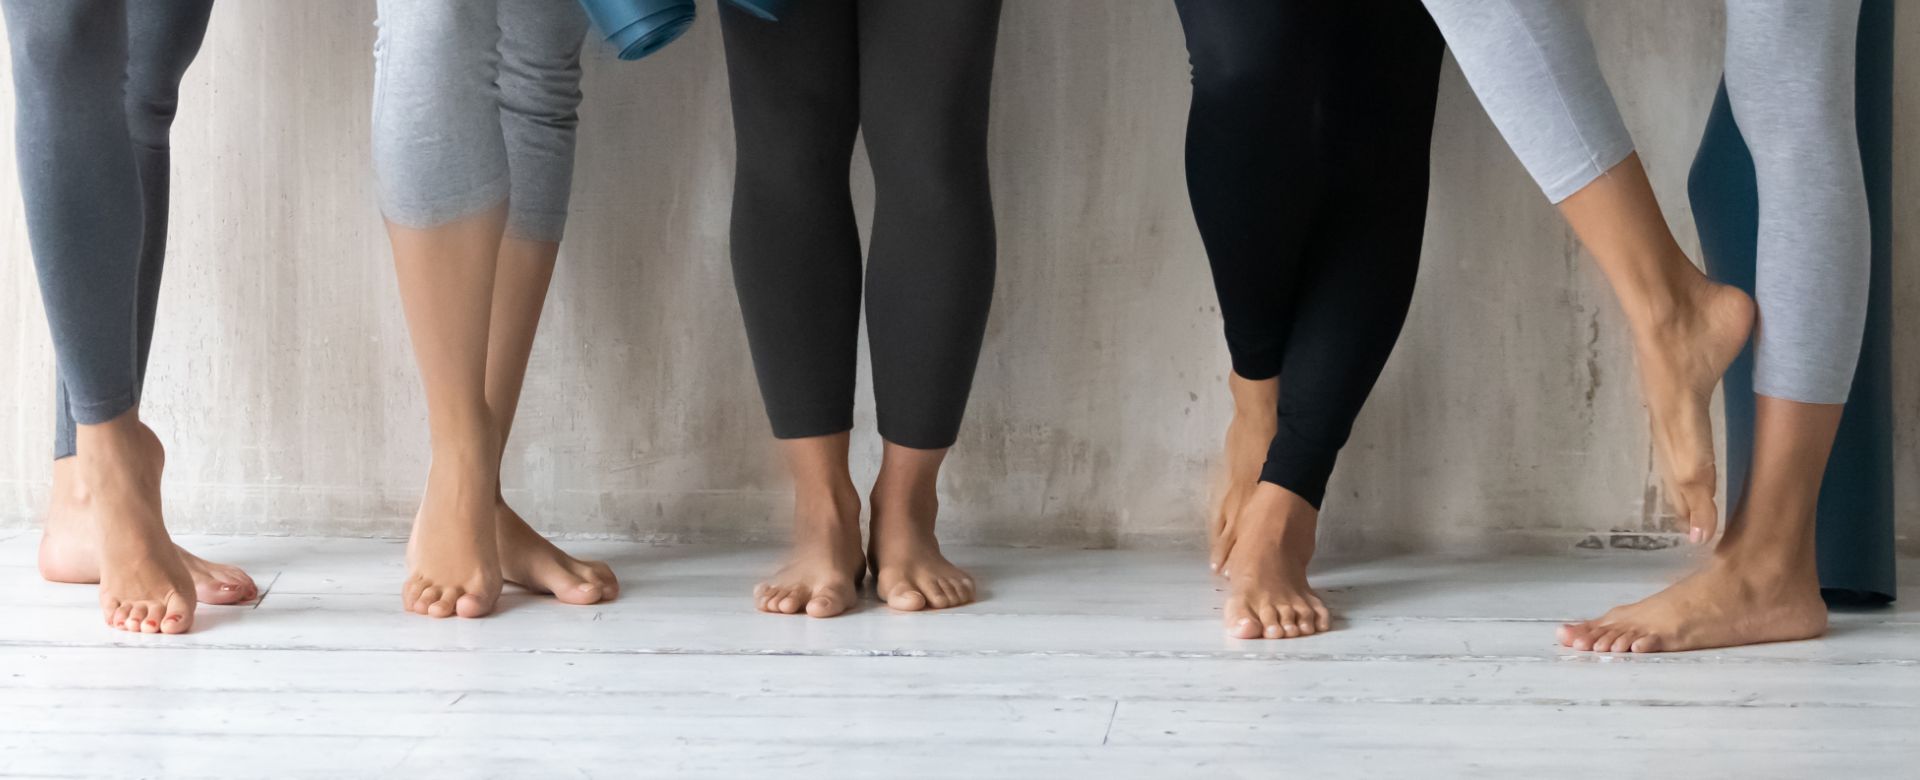 Lower shot of several pairs of bare feet in yoga clothes